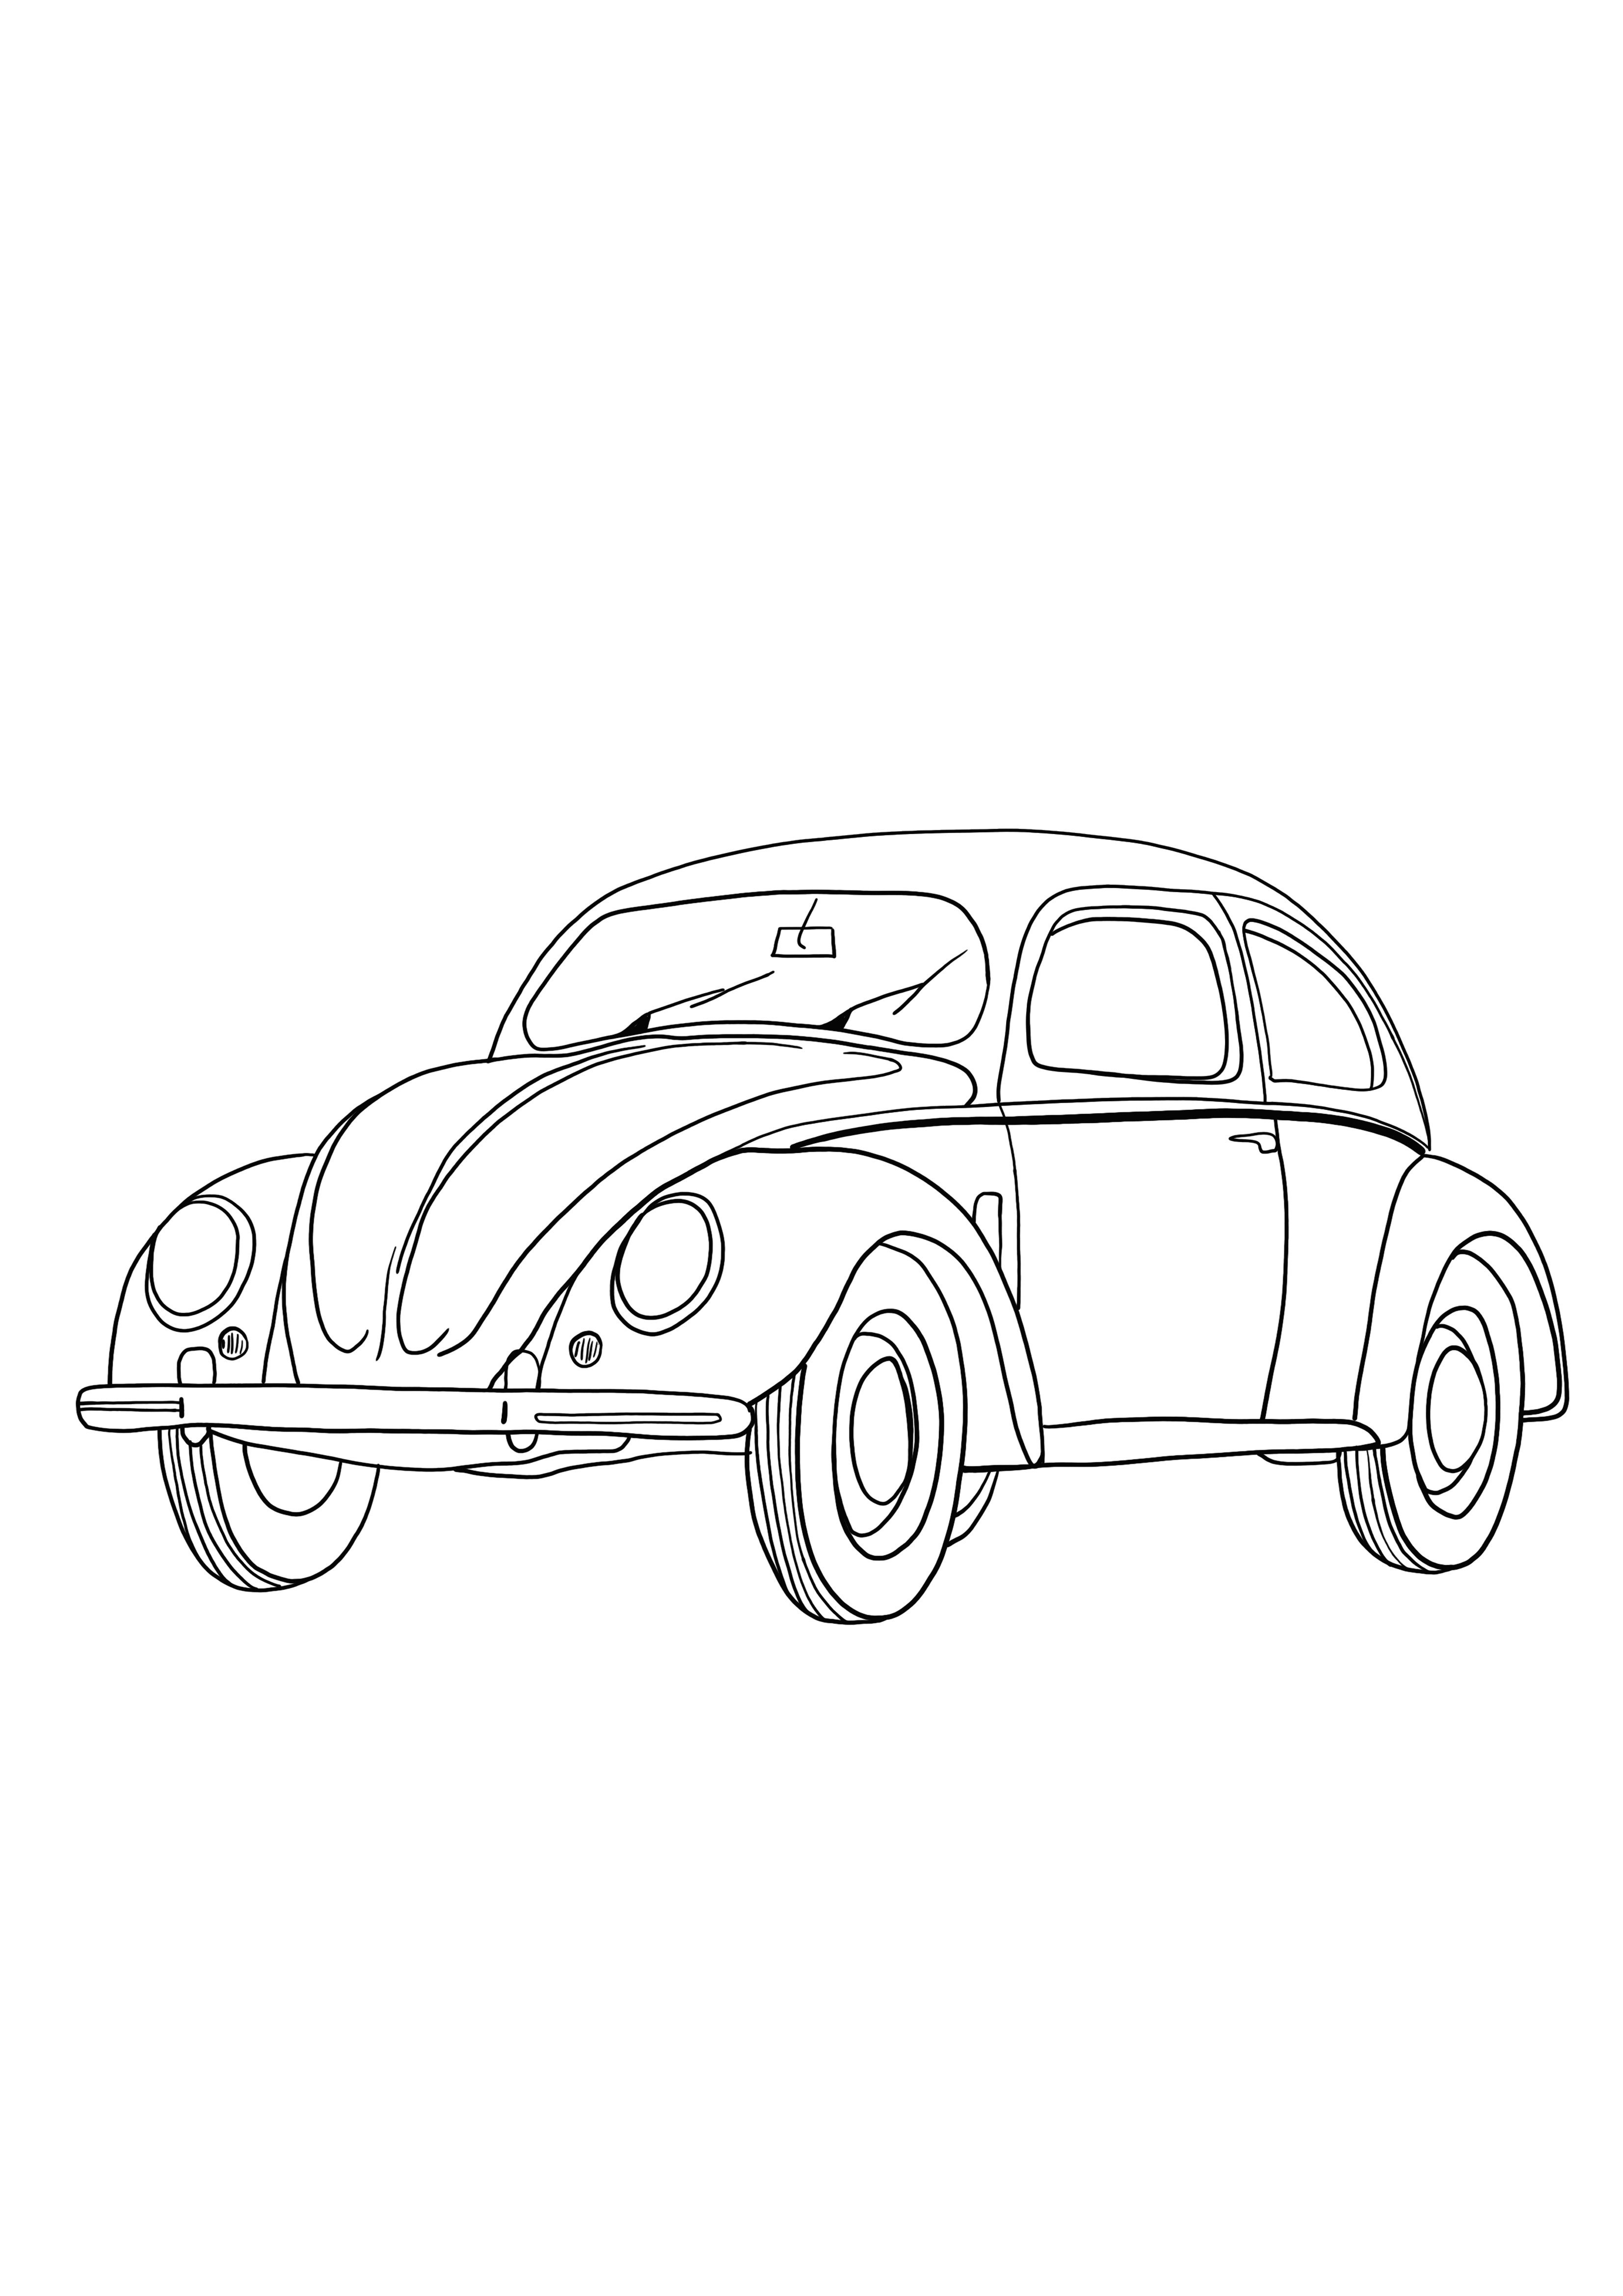 retro car for coloring and printing